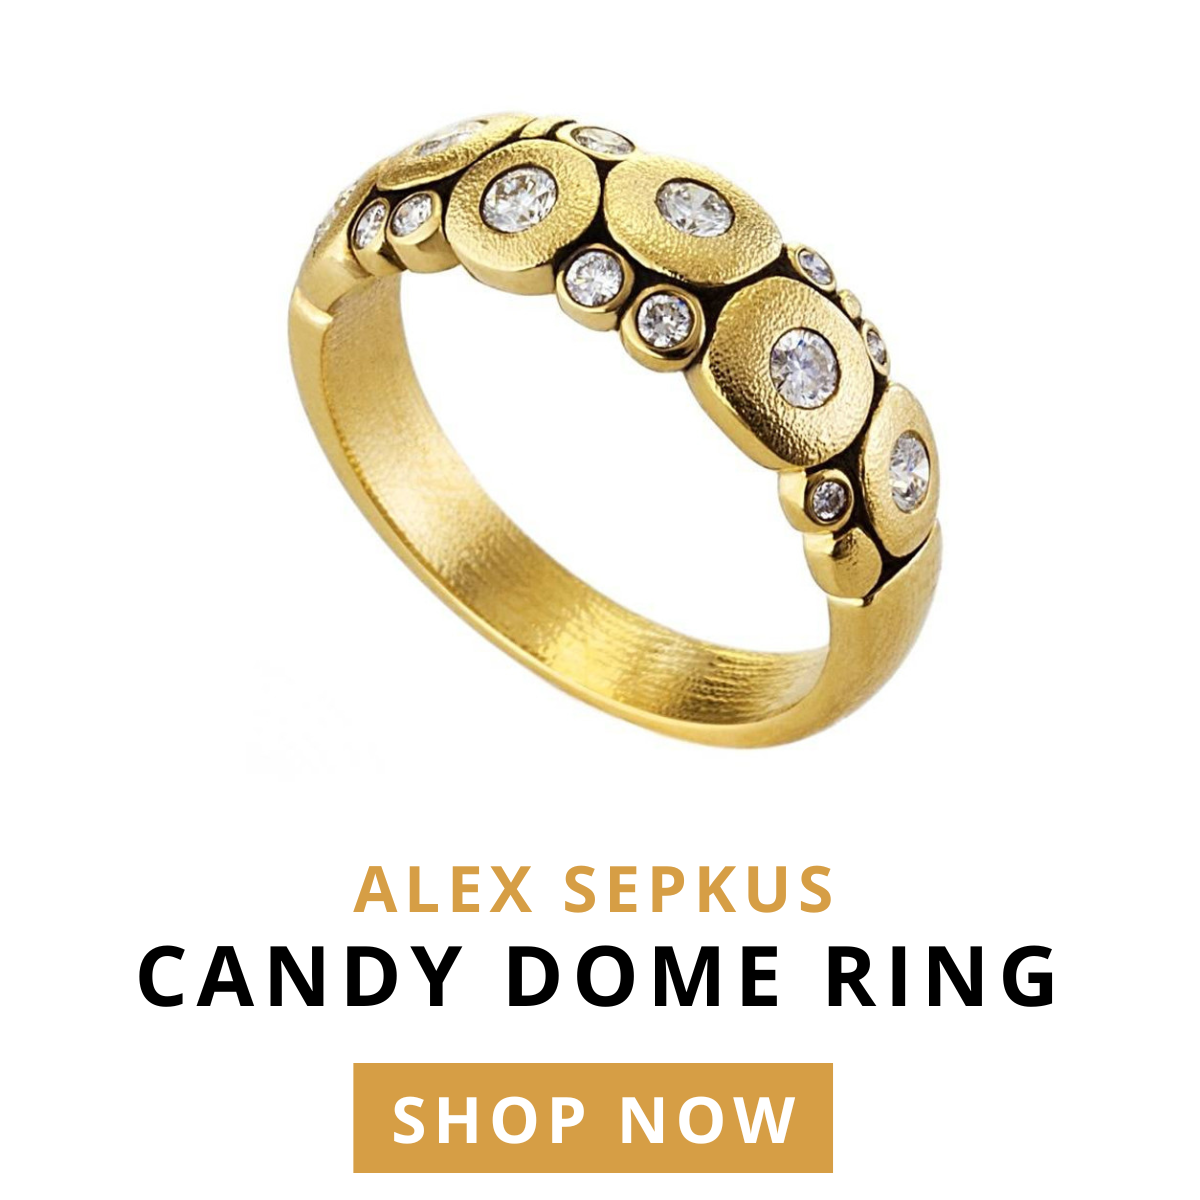 Alex Sepkus Candy Dome Ring